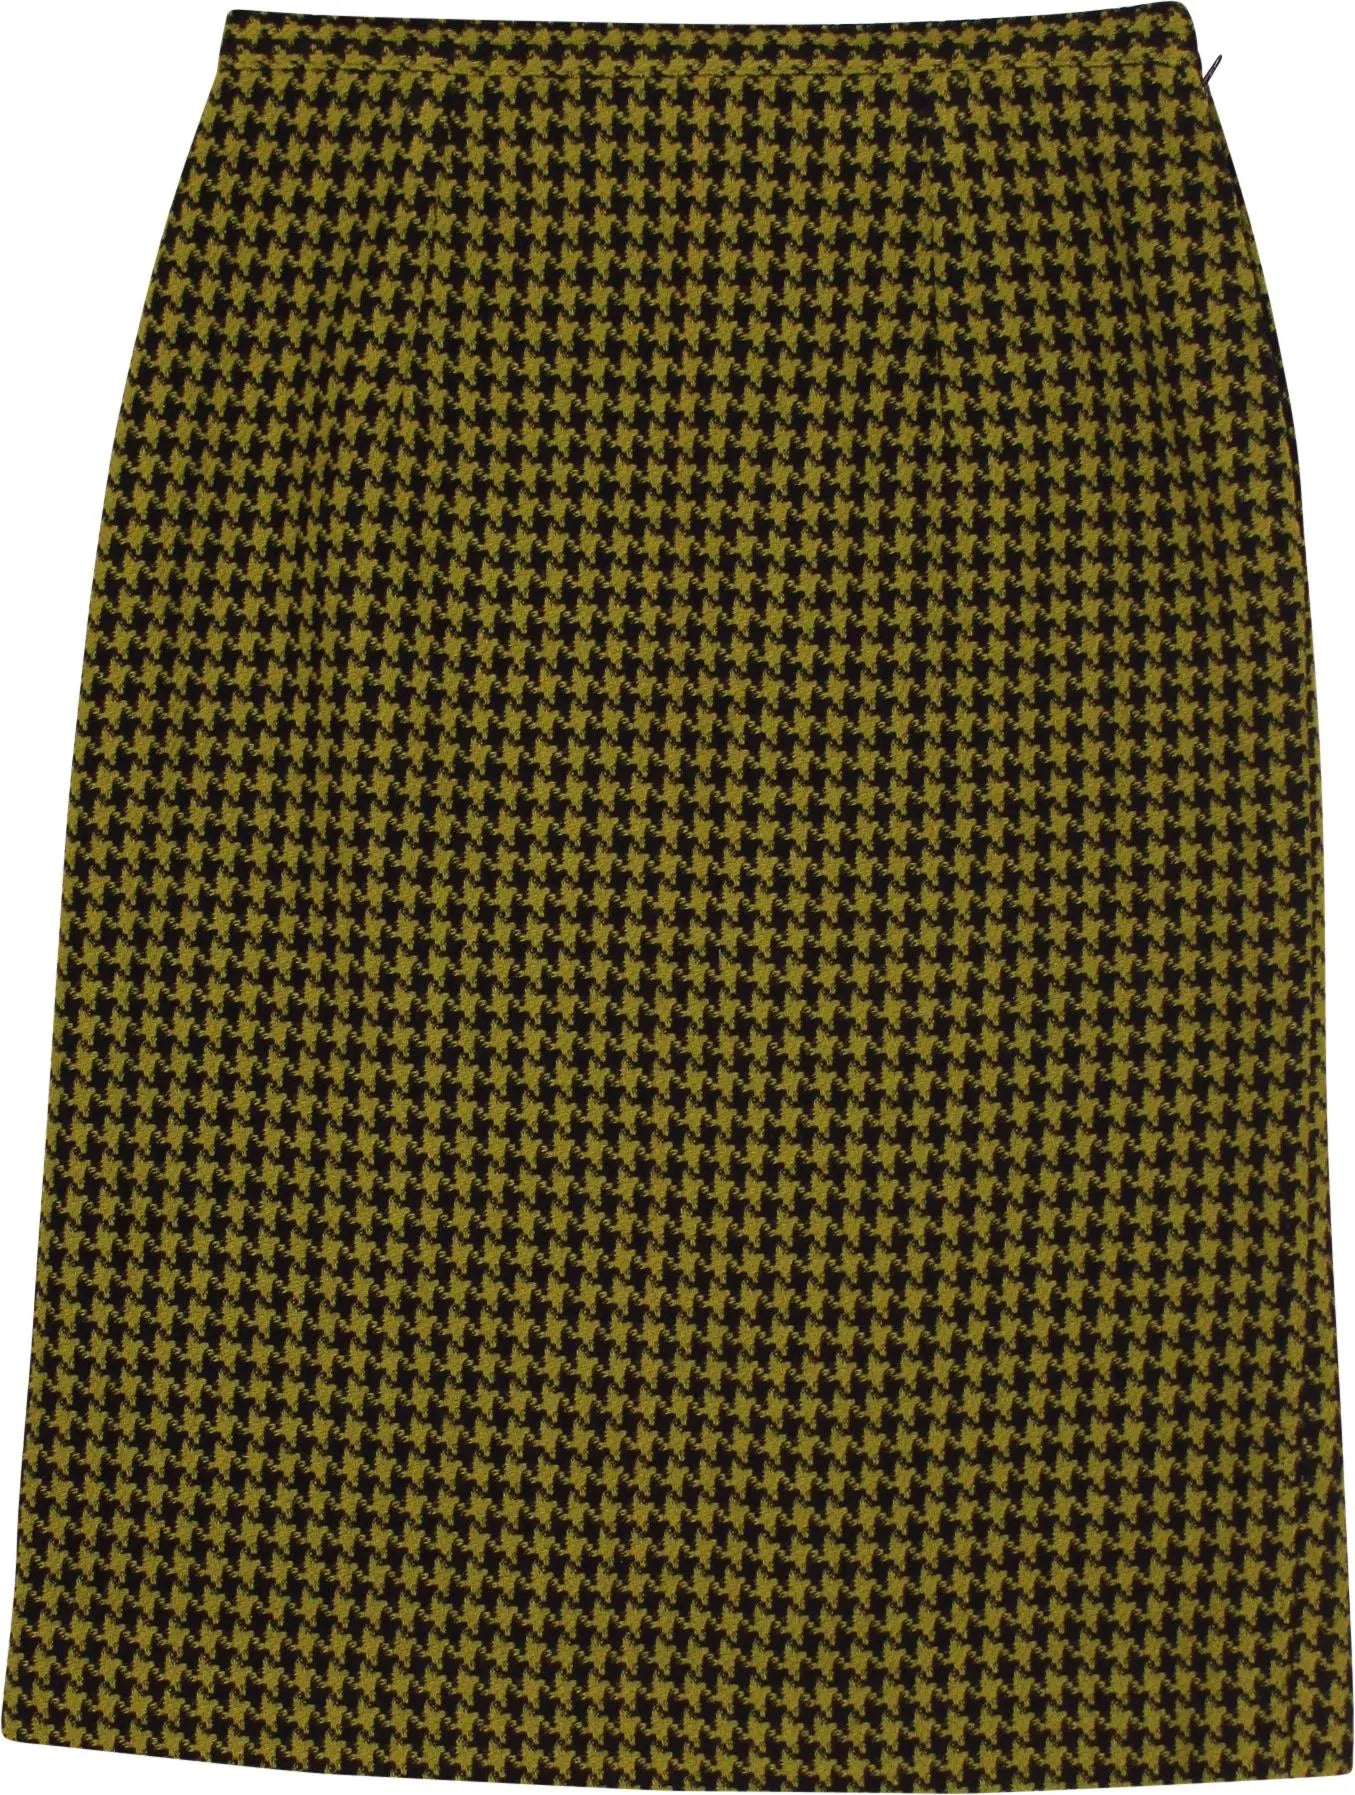 Unknown - Green Pied de Poule Pencil Skirt- ThriftTale.com - Vintage and second handclothing